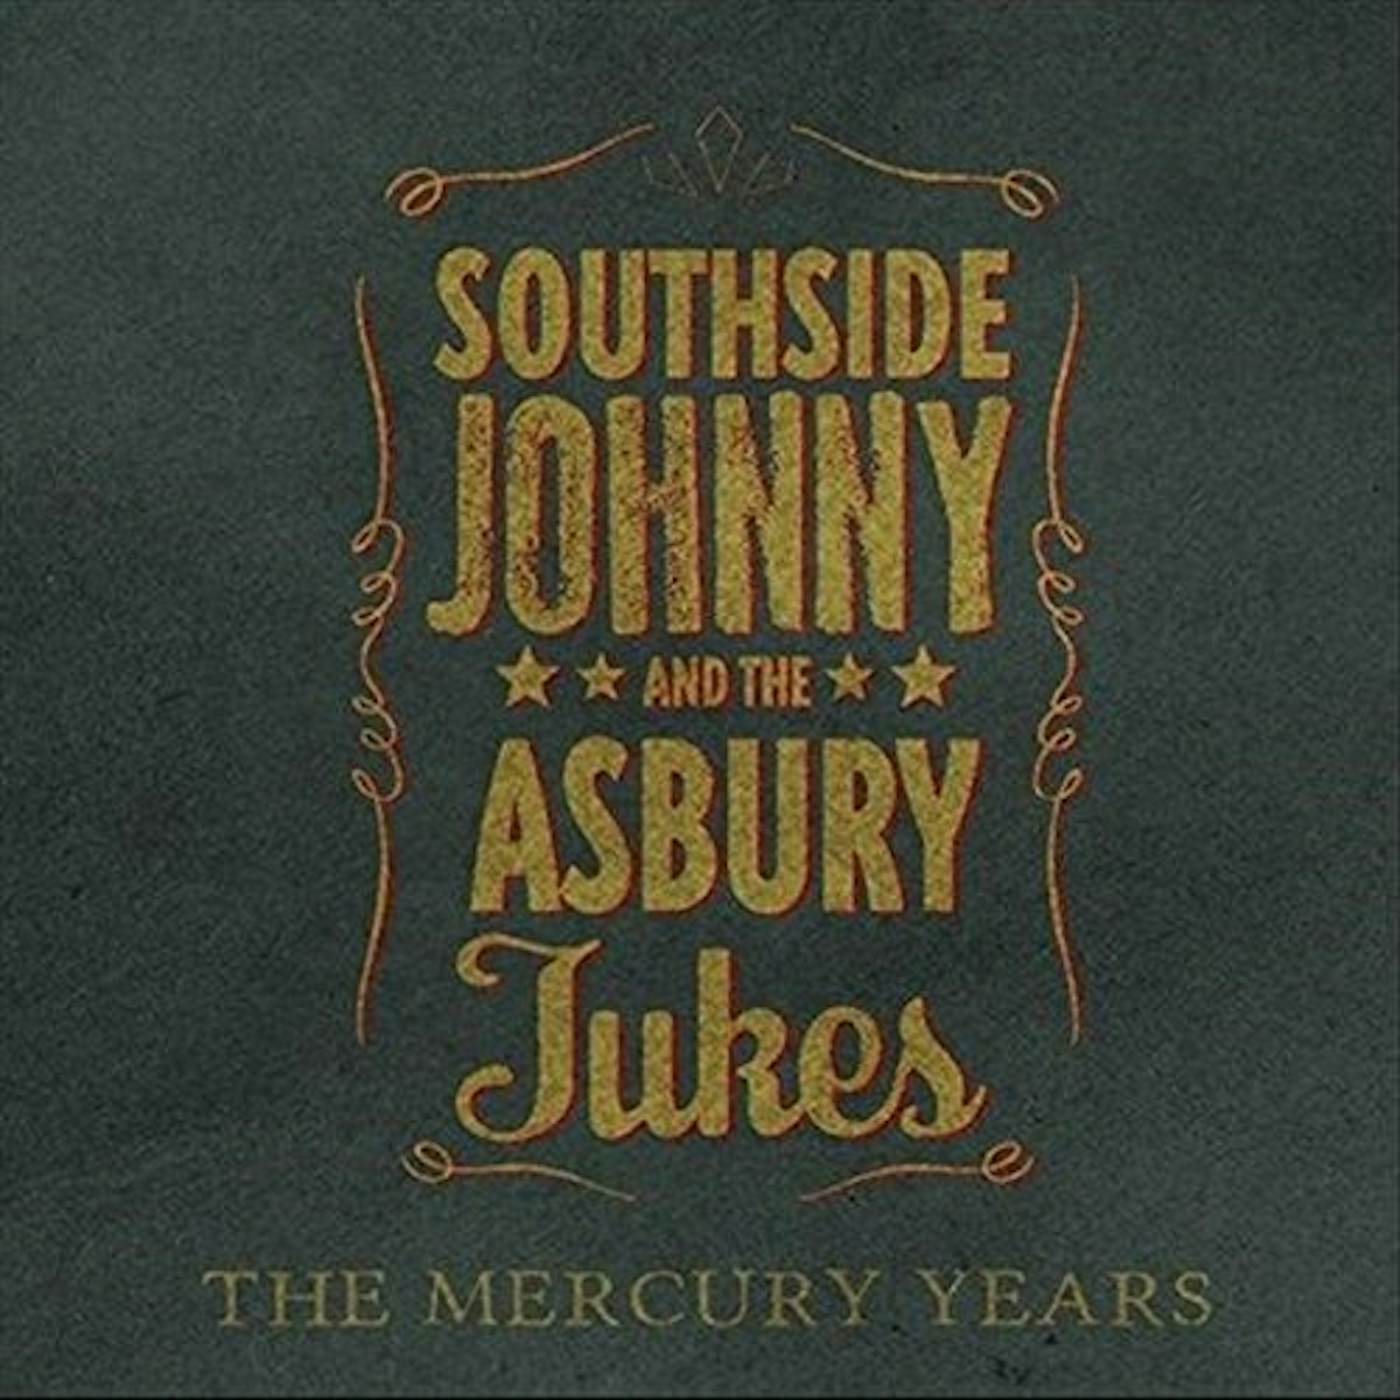 Southside Johnny And The Asbury Jukes MERCURY YEARS CD